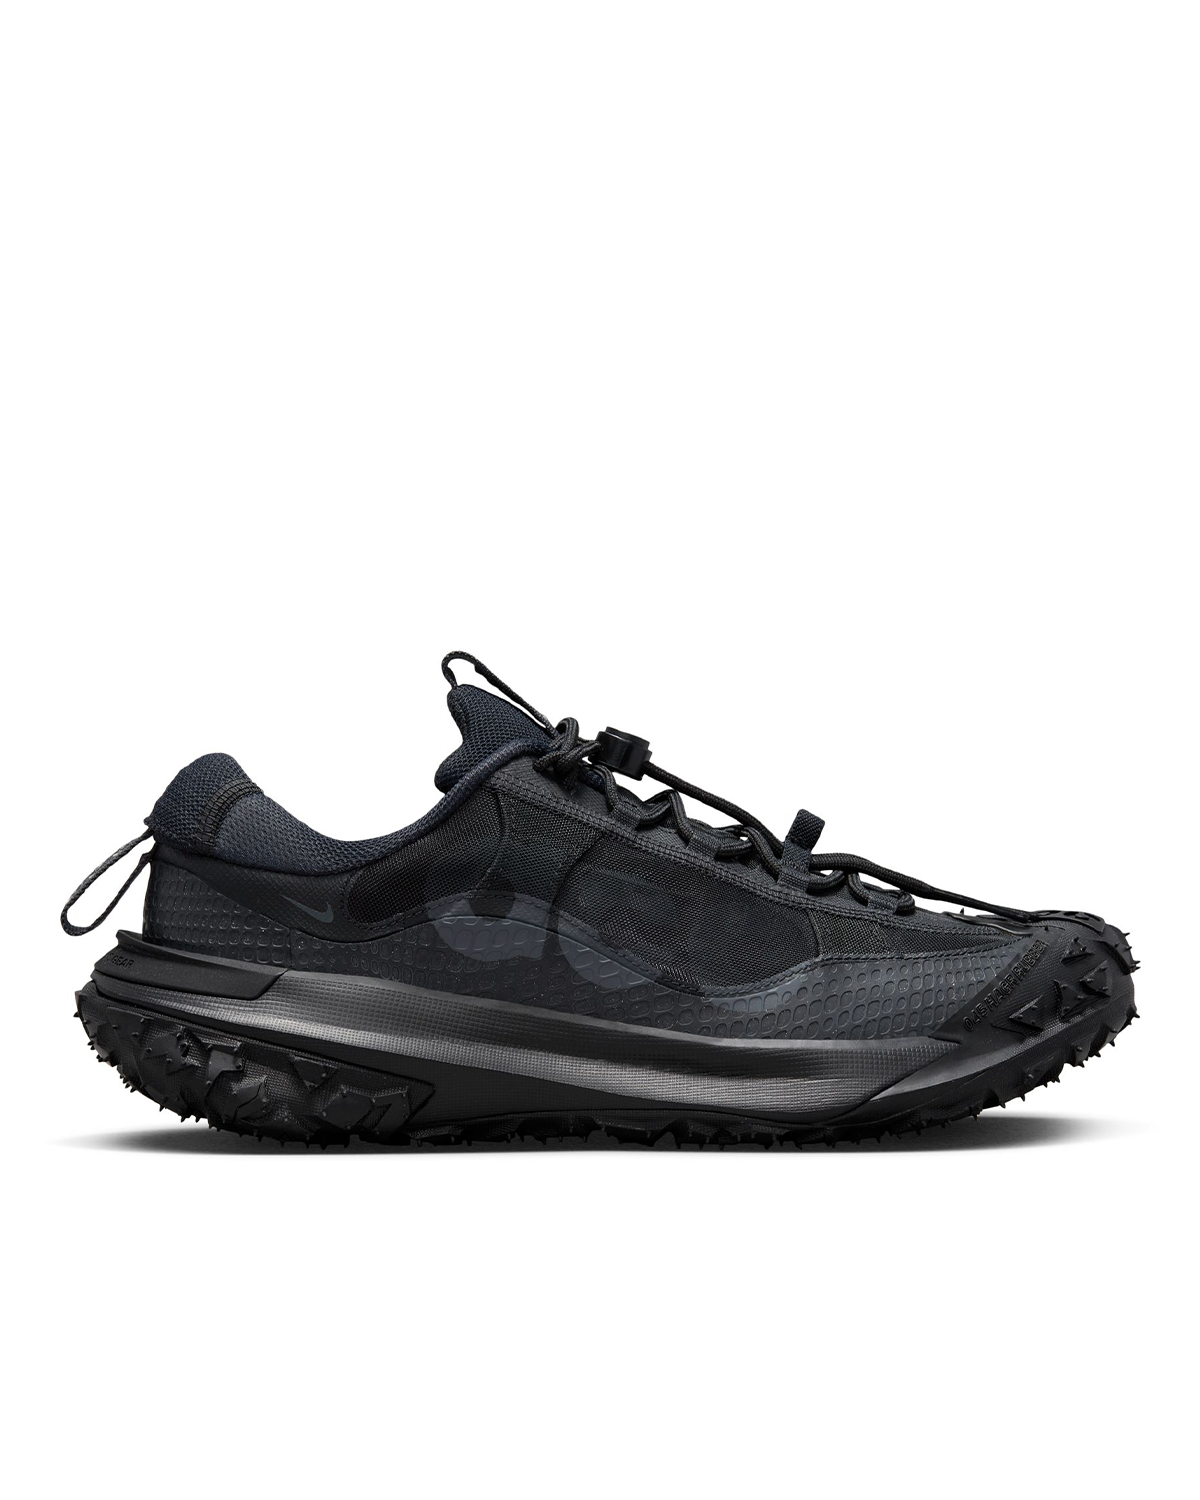 ACG Mountain Fly 2 Low Black/Anthracite